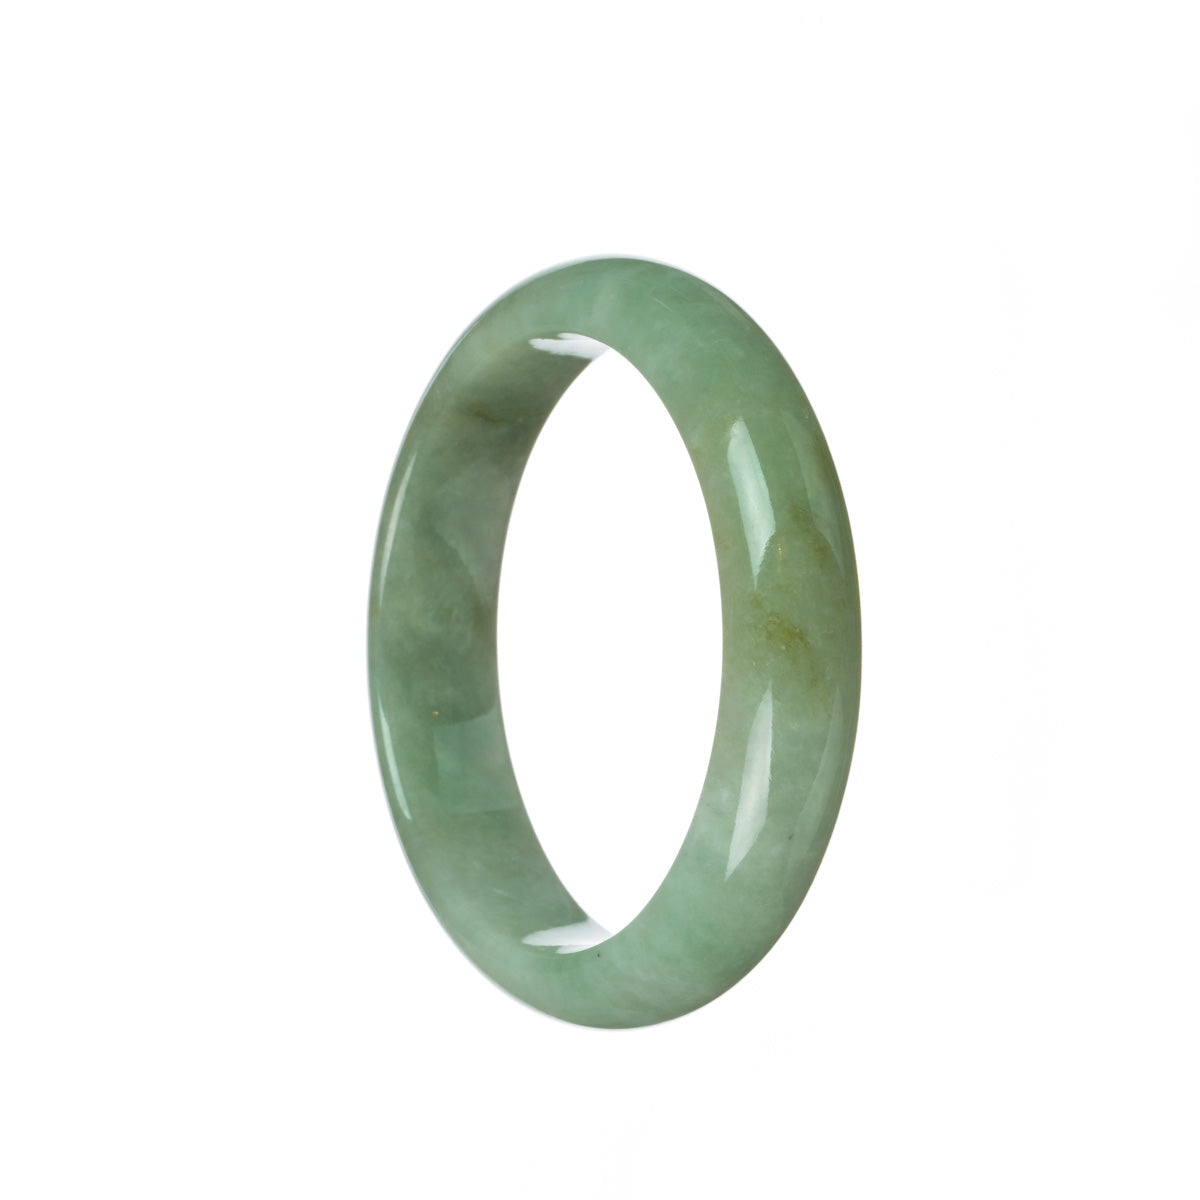 A beautiful half moon-shaped bangle made of genuine untreated green Burmese jade, measuring 57mm in diameter. The bangle is a stunning piece of jewelry from MAYS.